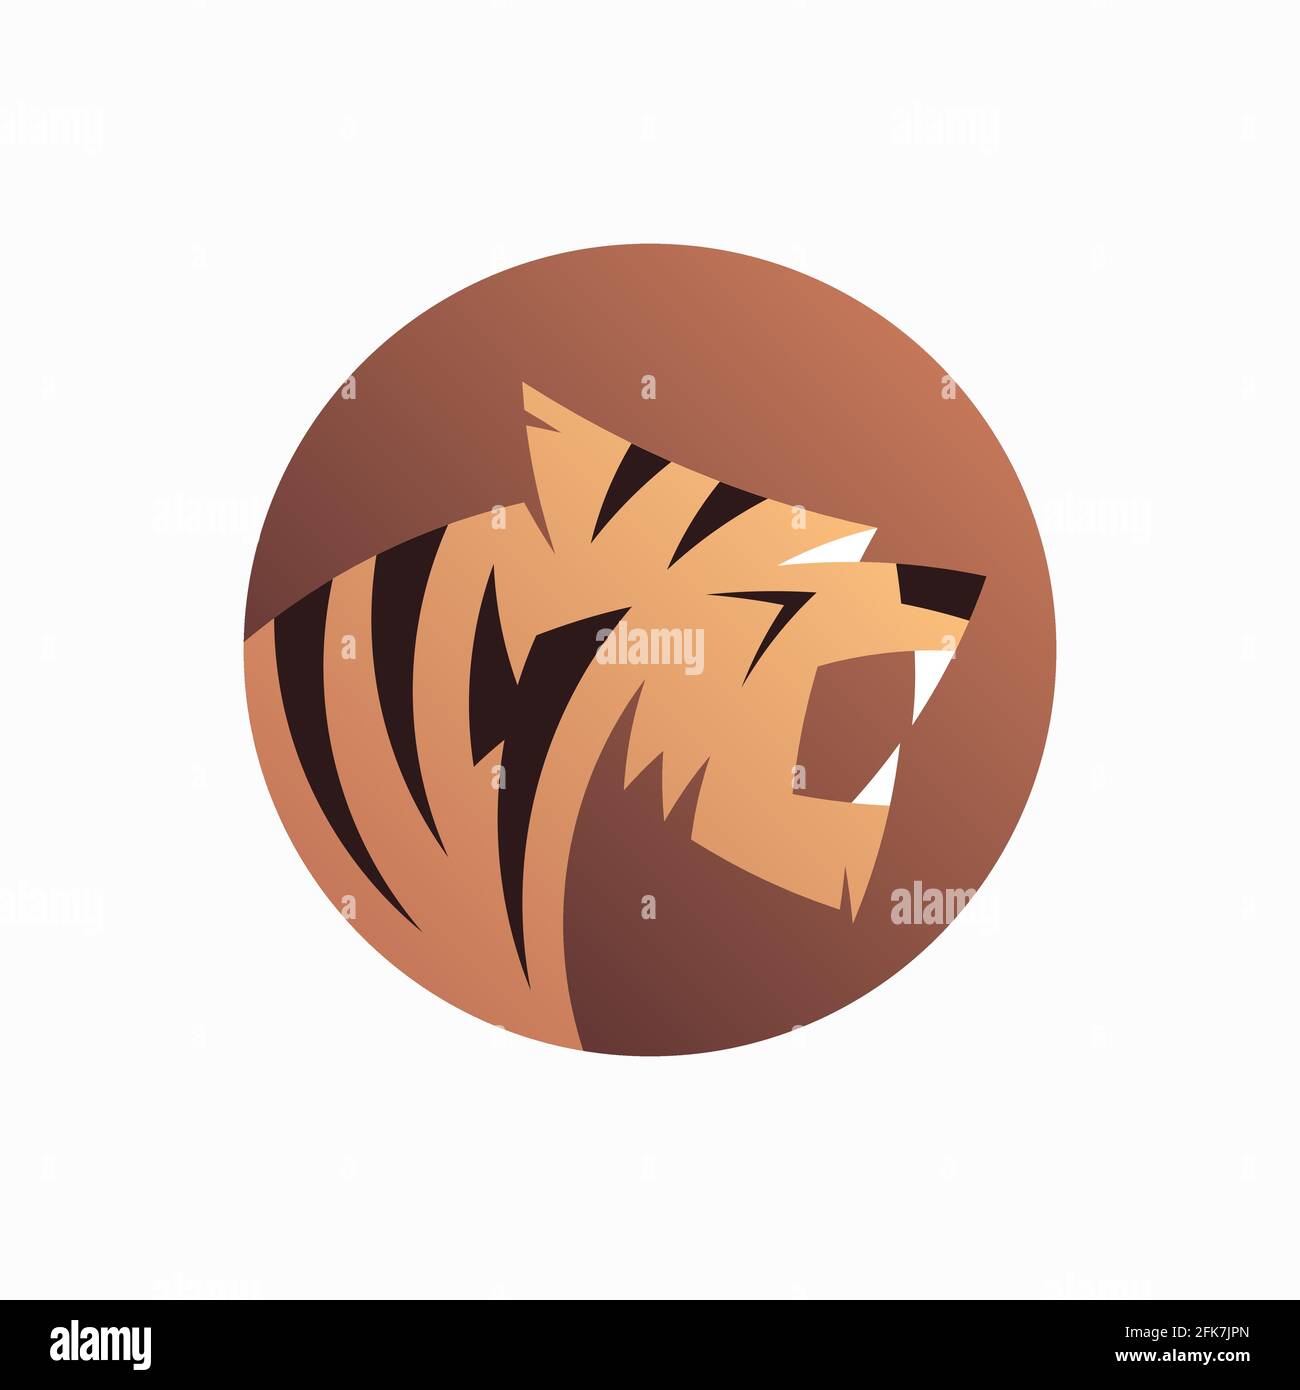 Tiger logo design. Vector illustration of abstract roaring tiger isolated on white background Stock Vector